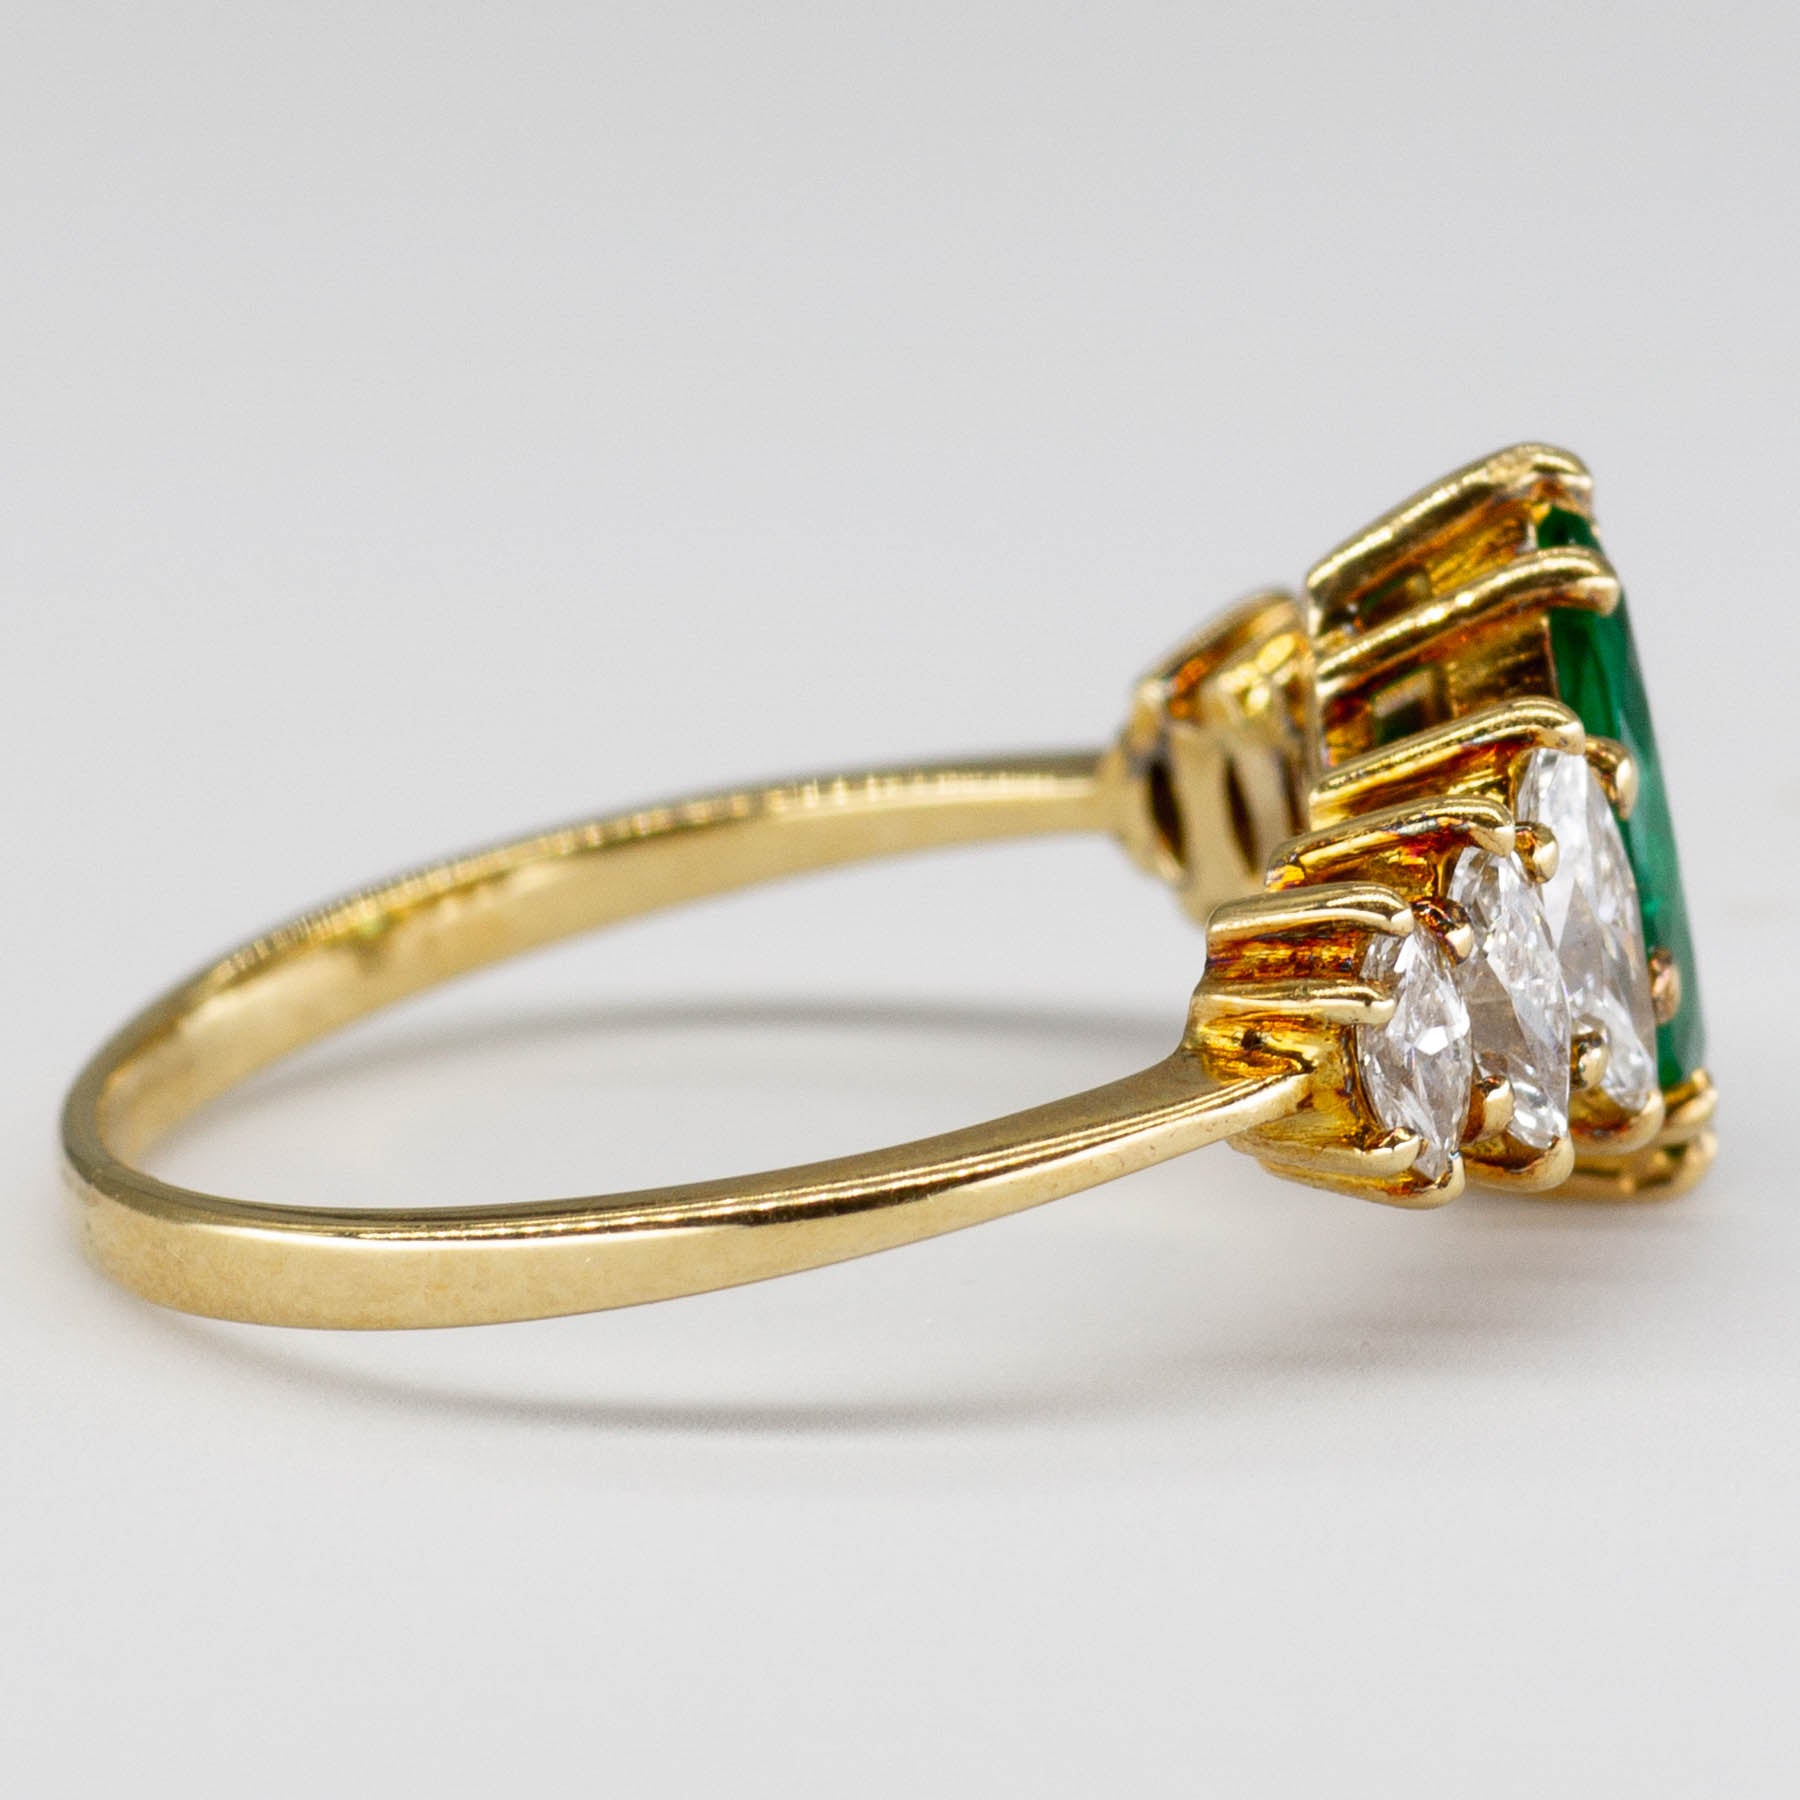 Vintage Marquis Emerald and Diamond Ring | SZ 7.5